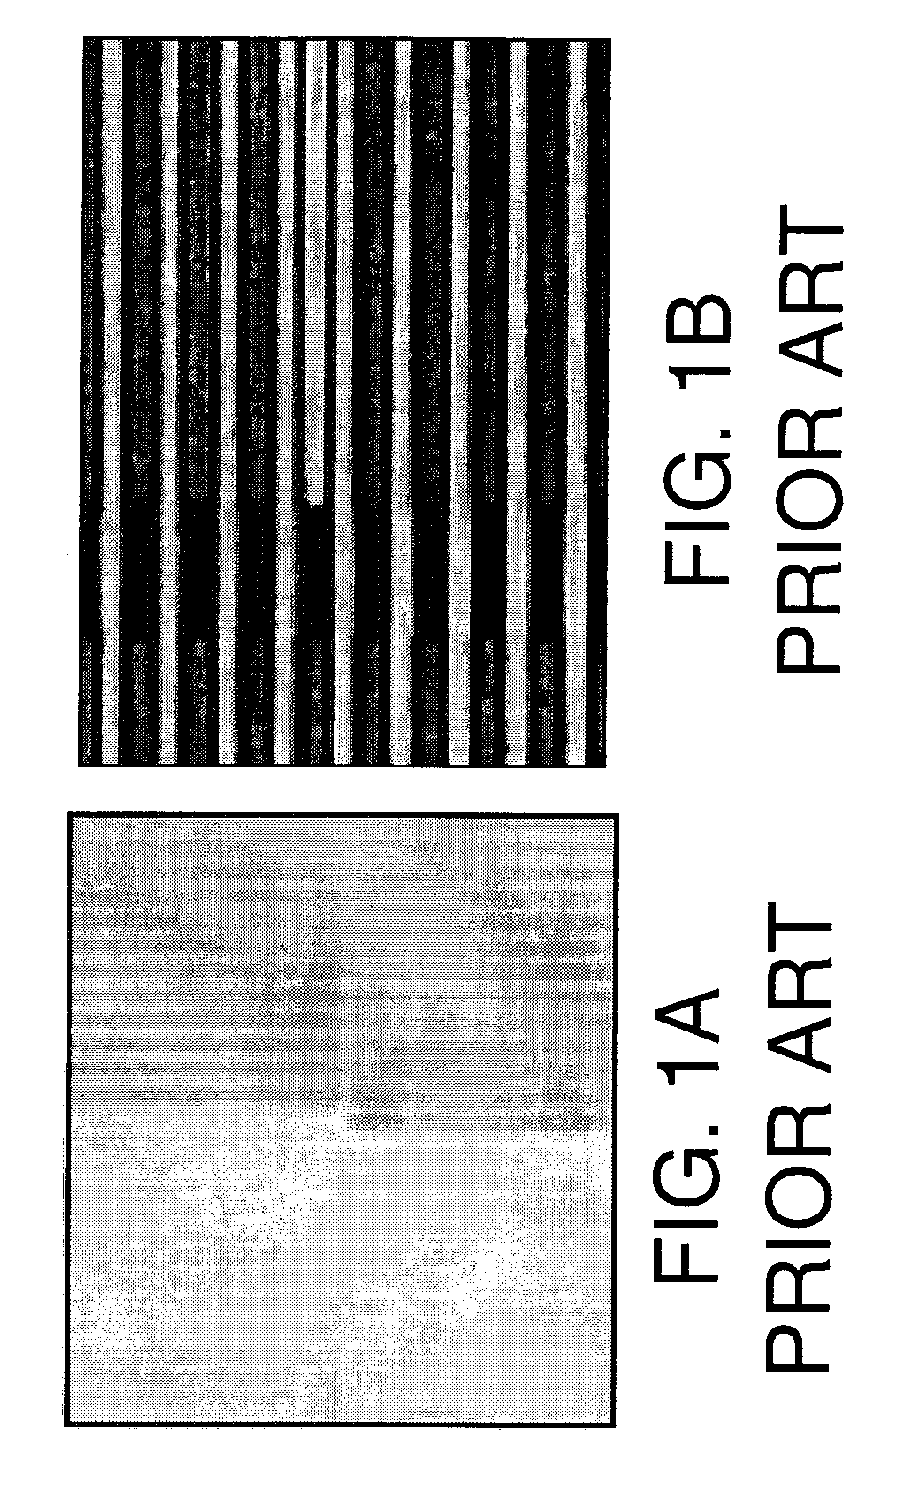 Test structures and method of defect detection using voltage contrast inspection